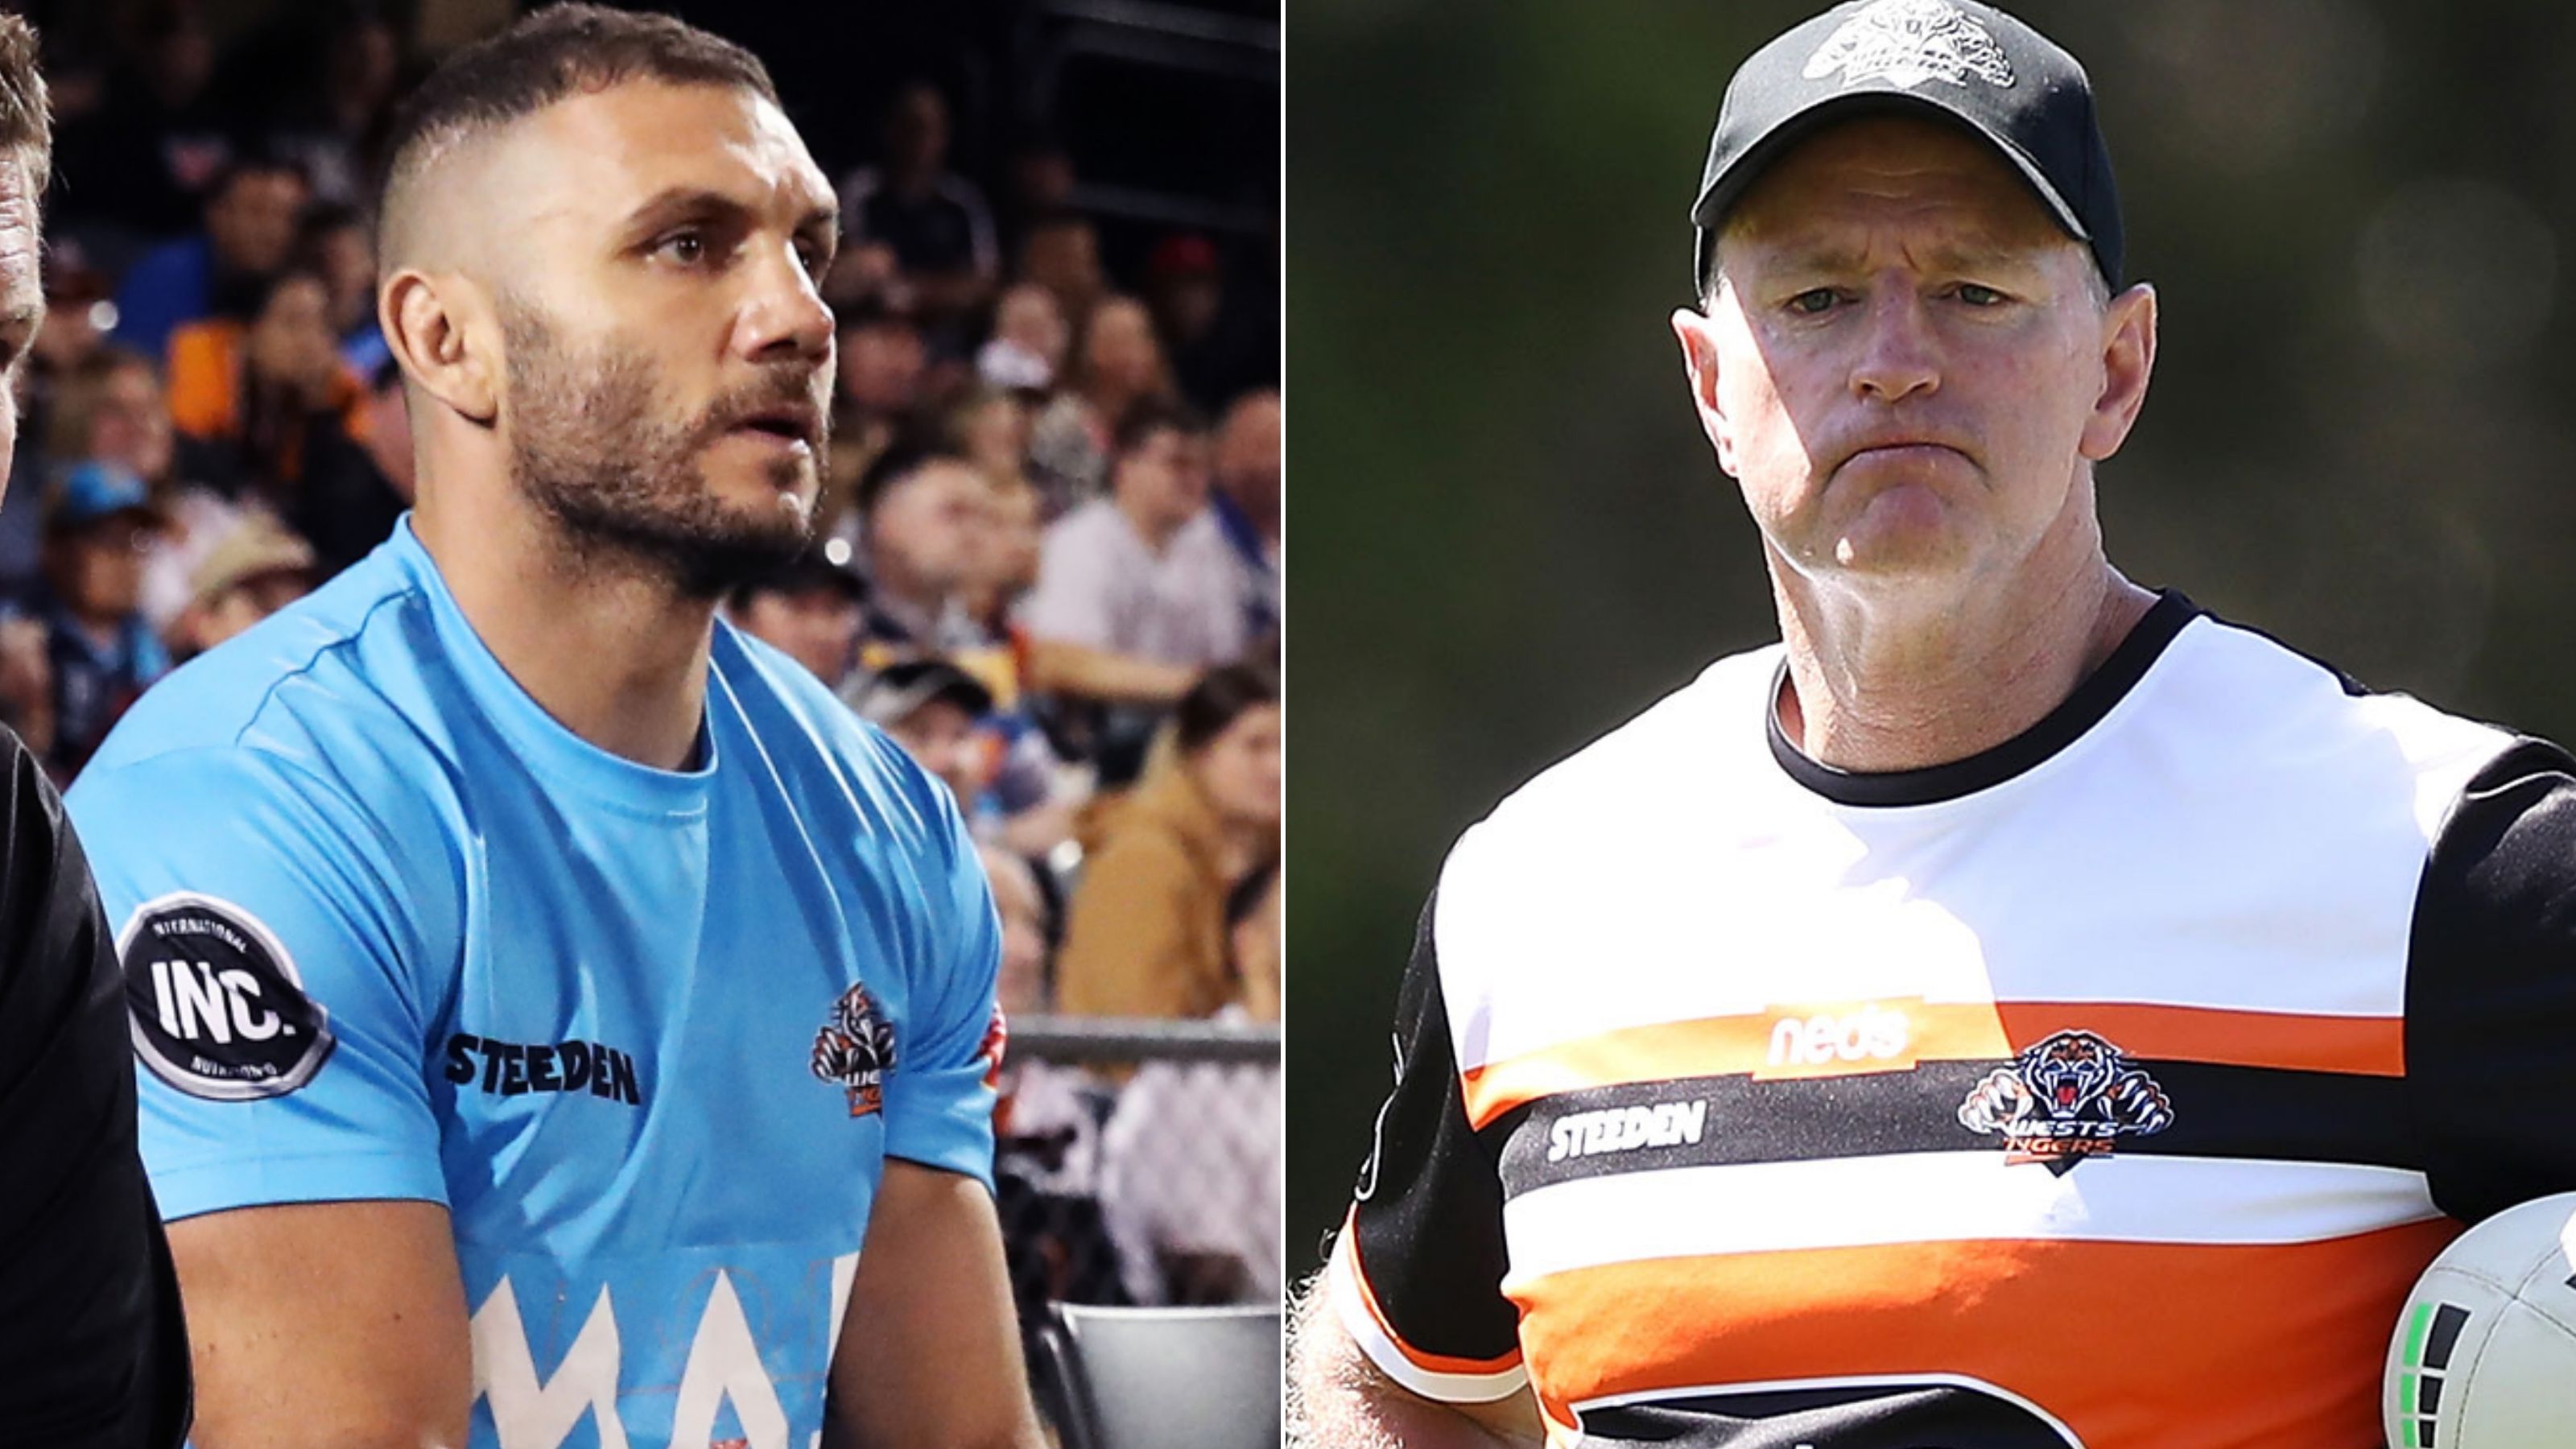 Robbie Farah and Wests Tigers coach Michael Maguire.